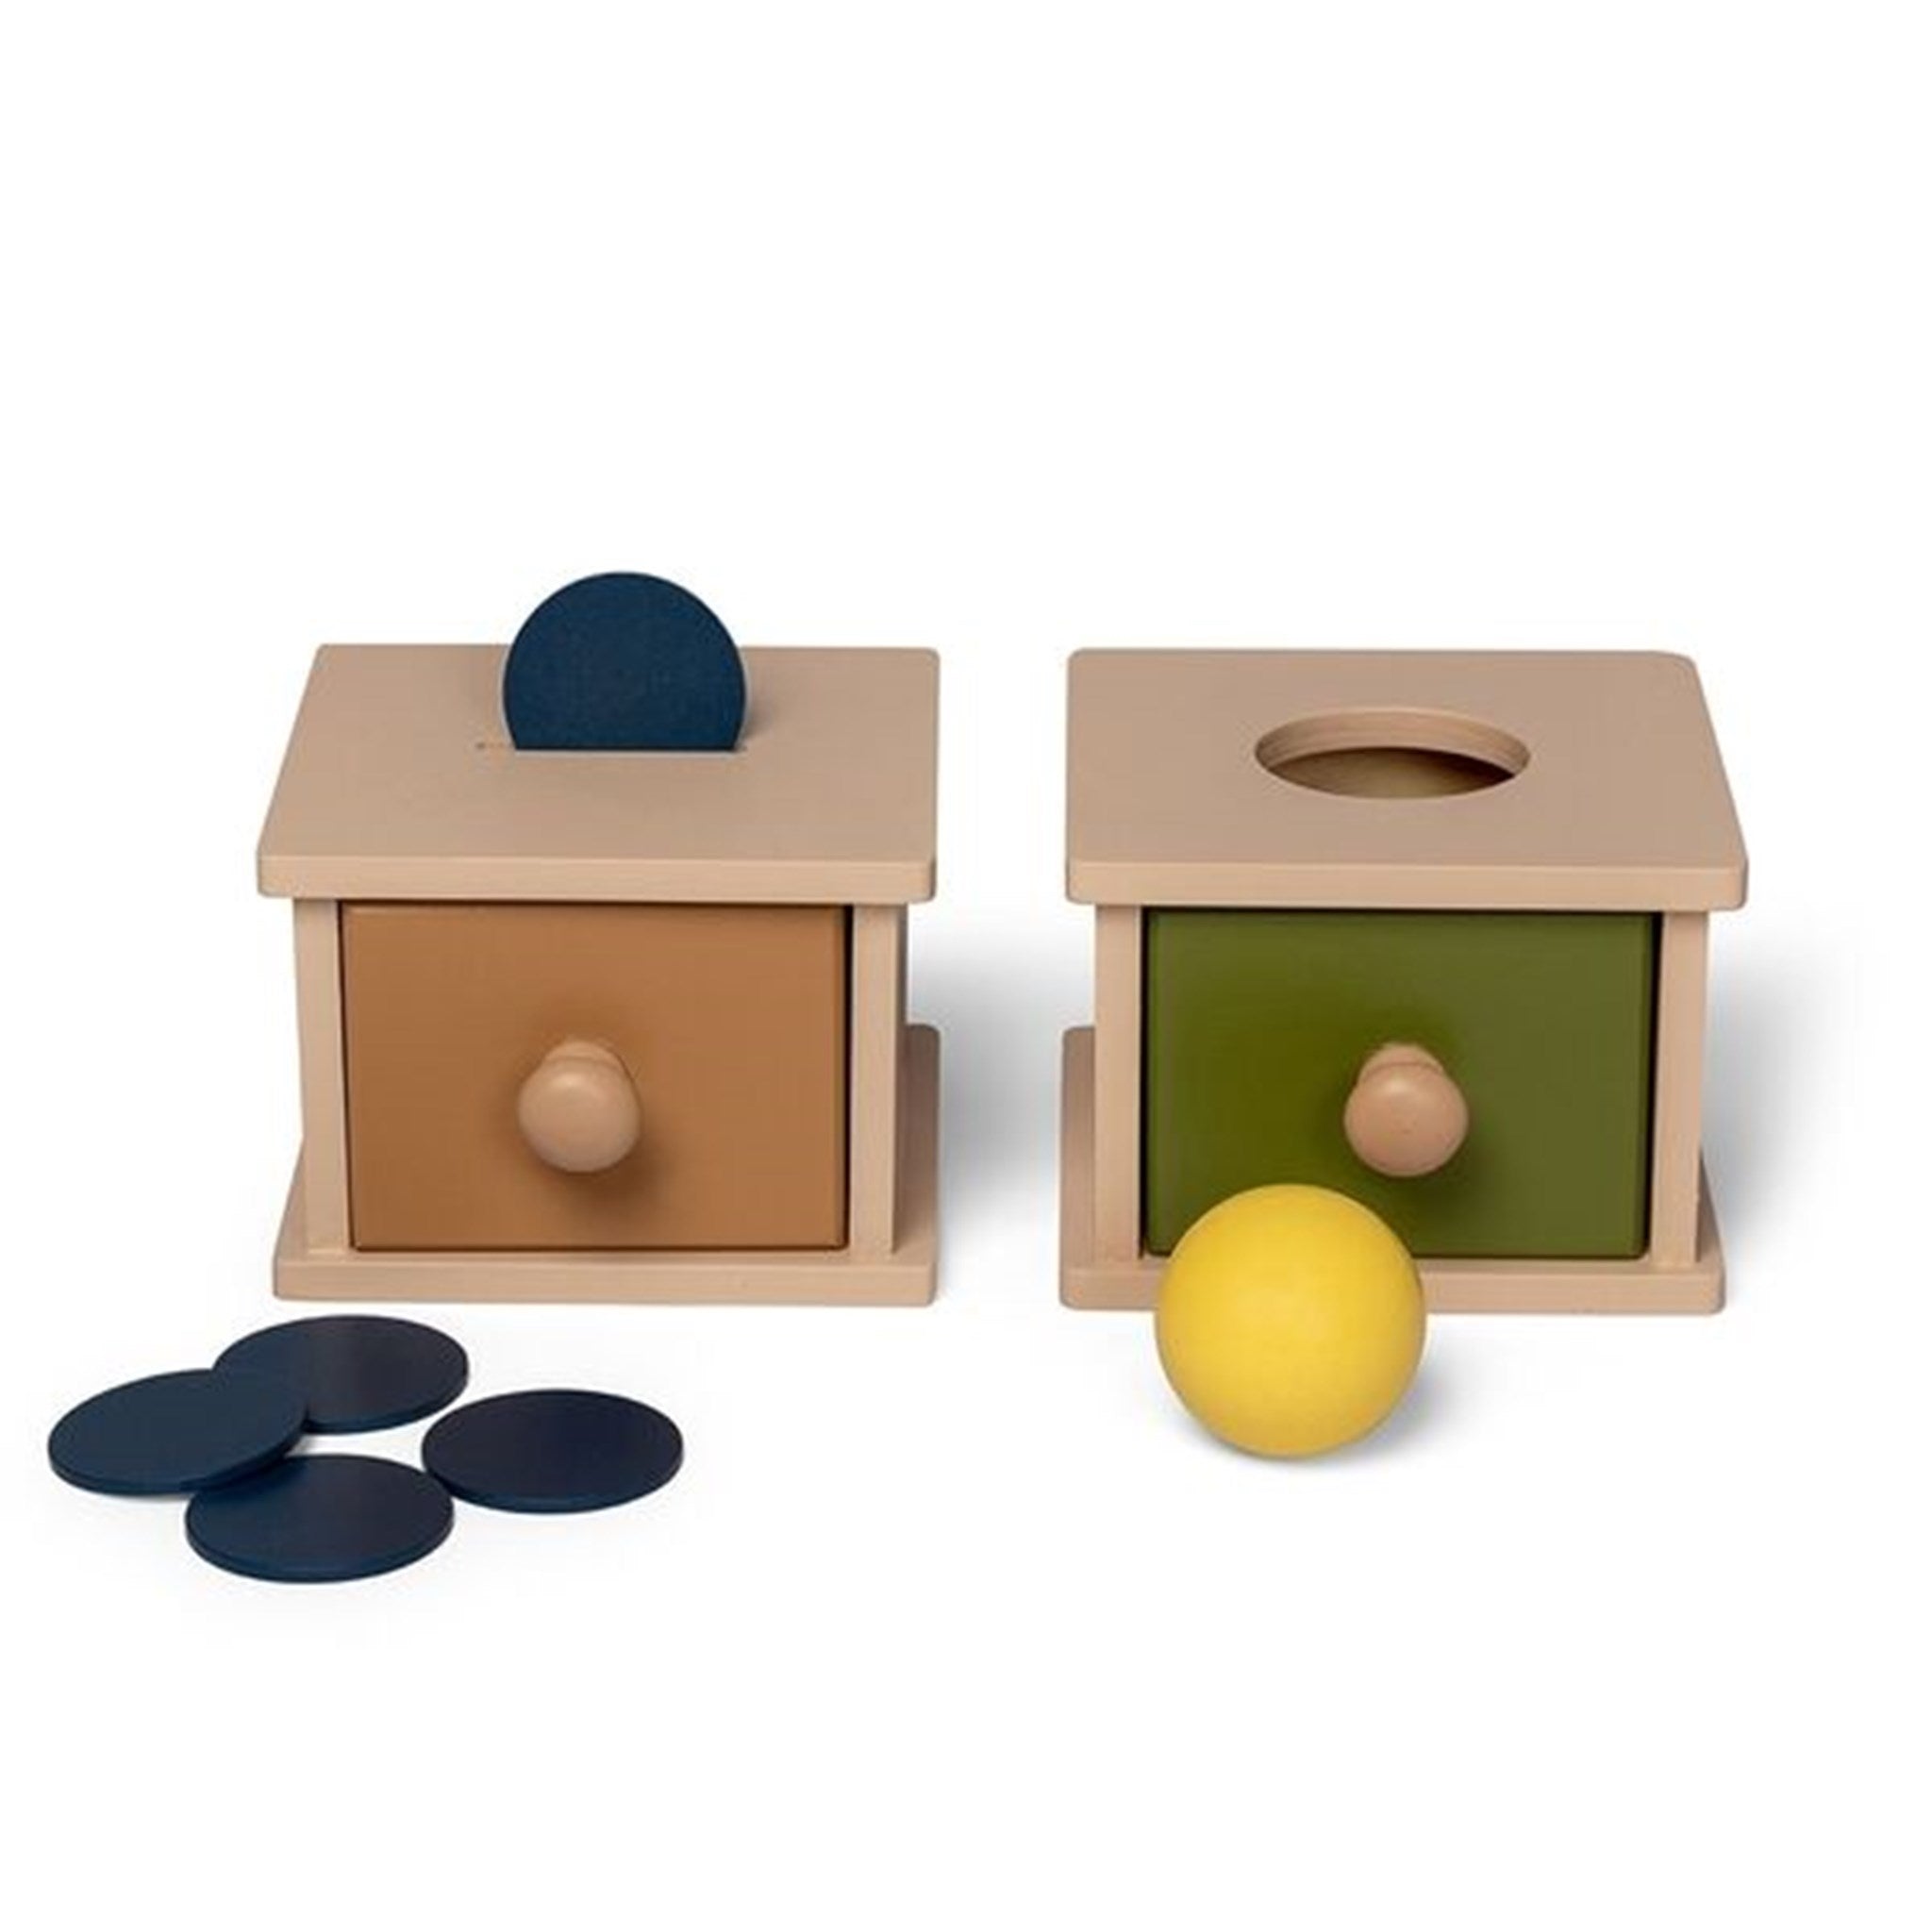 That's Mine 2-pack Wooden Sorting Boxes